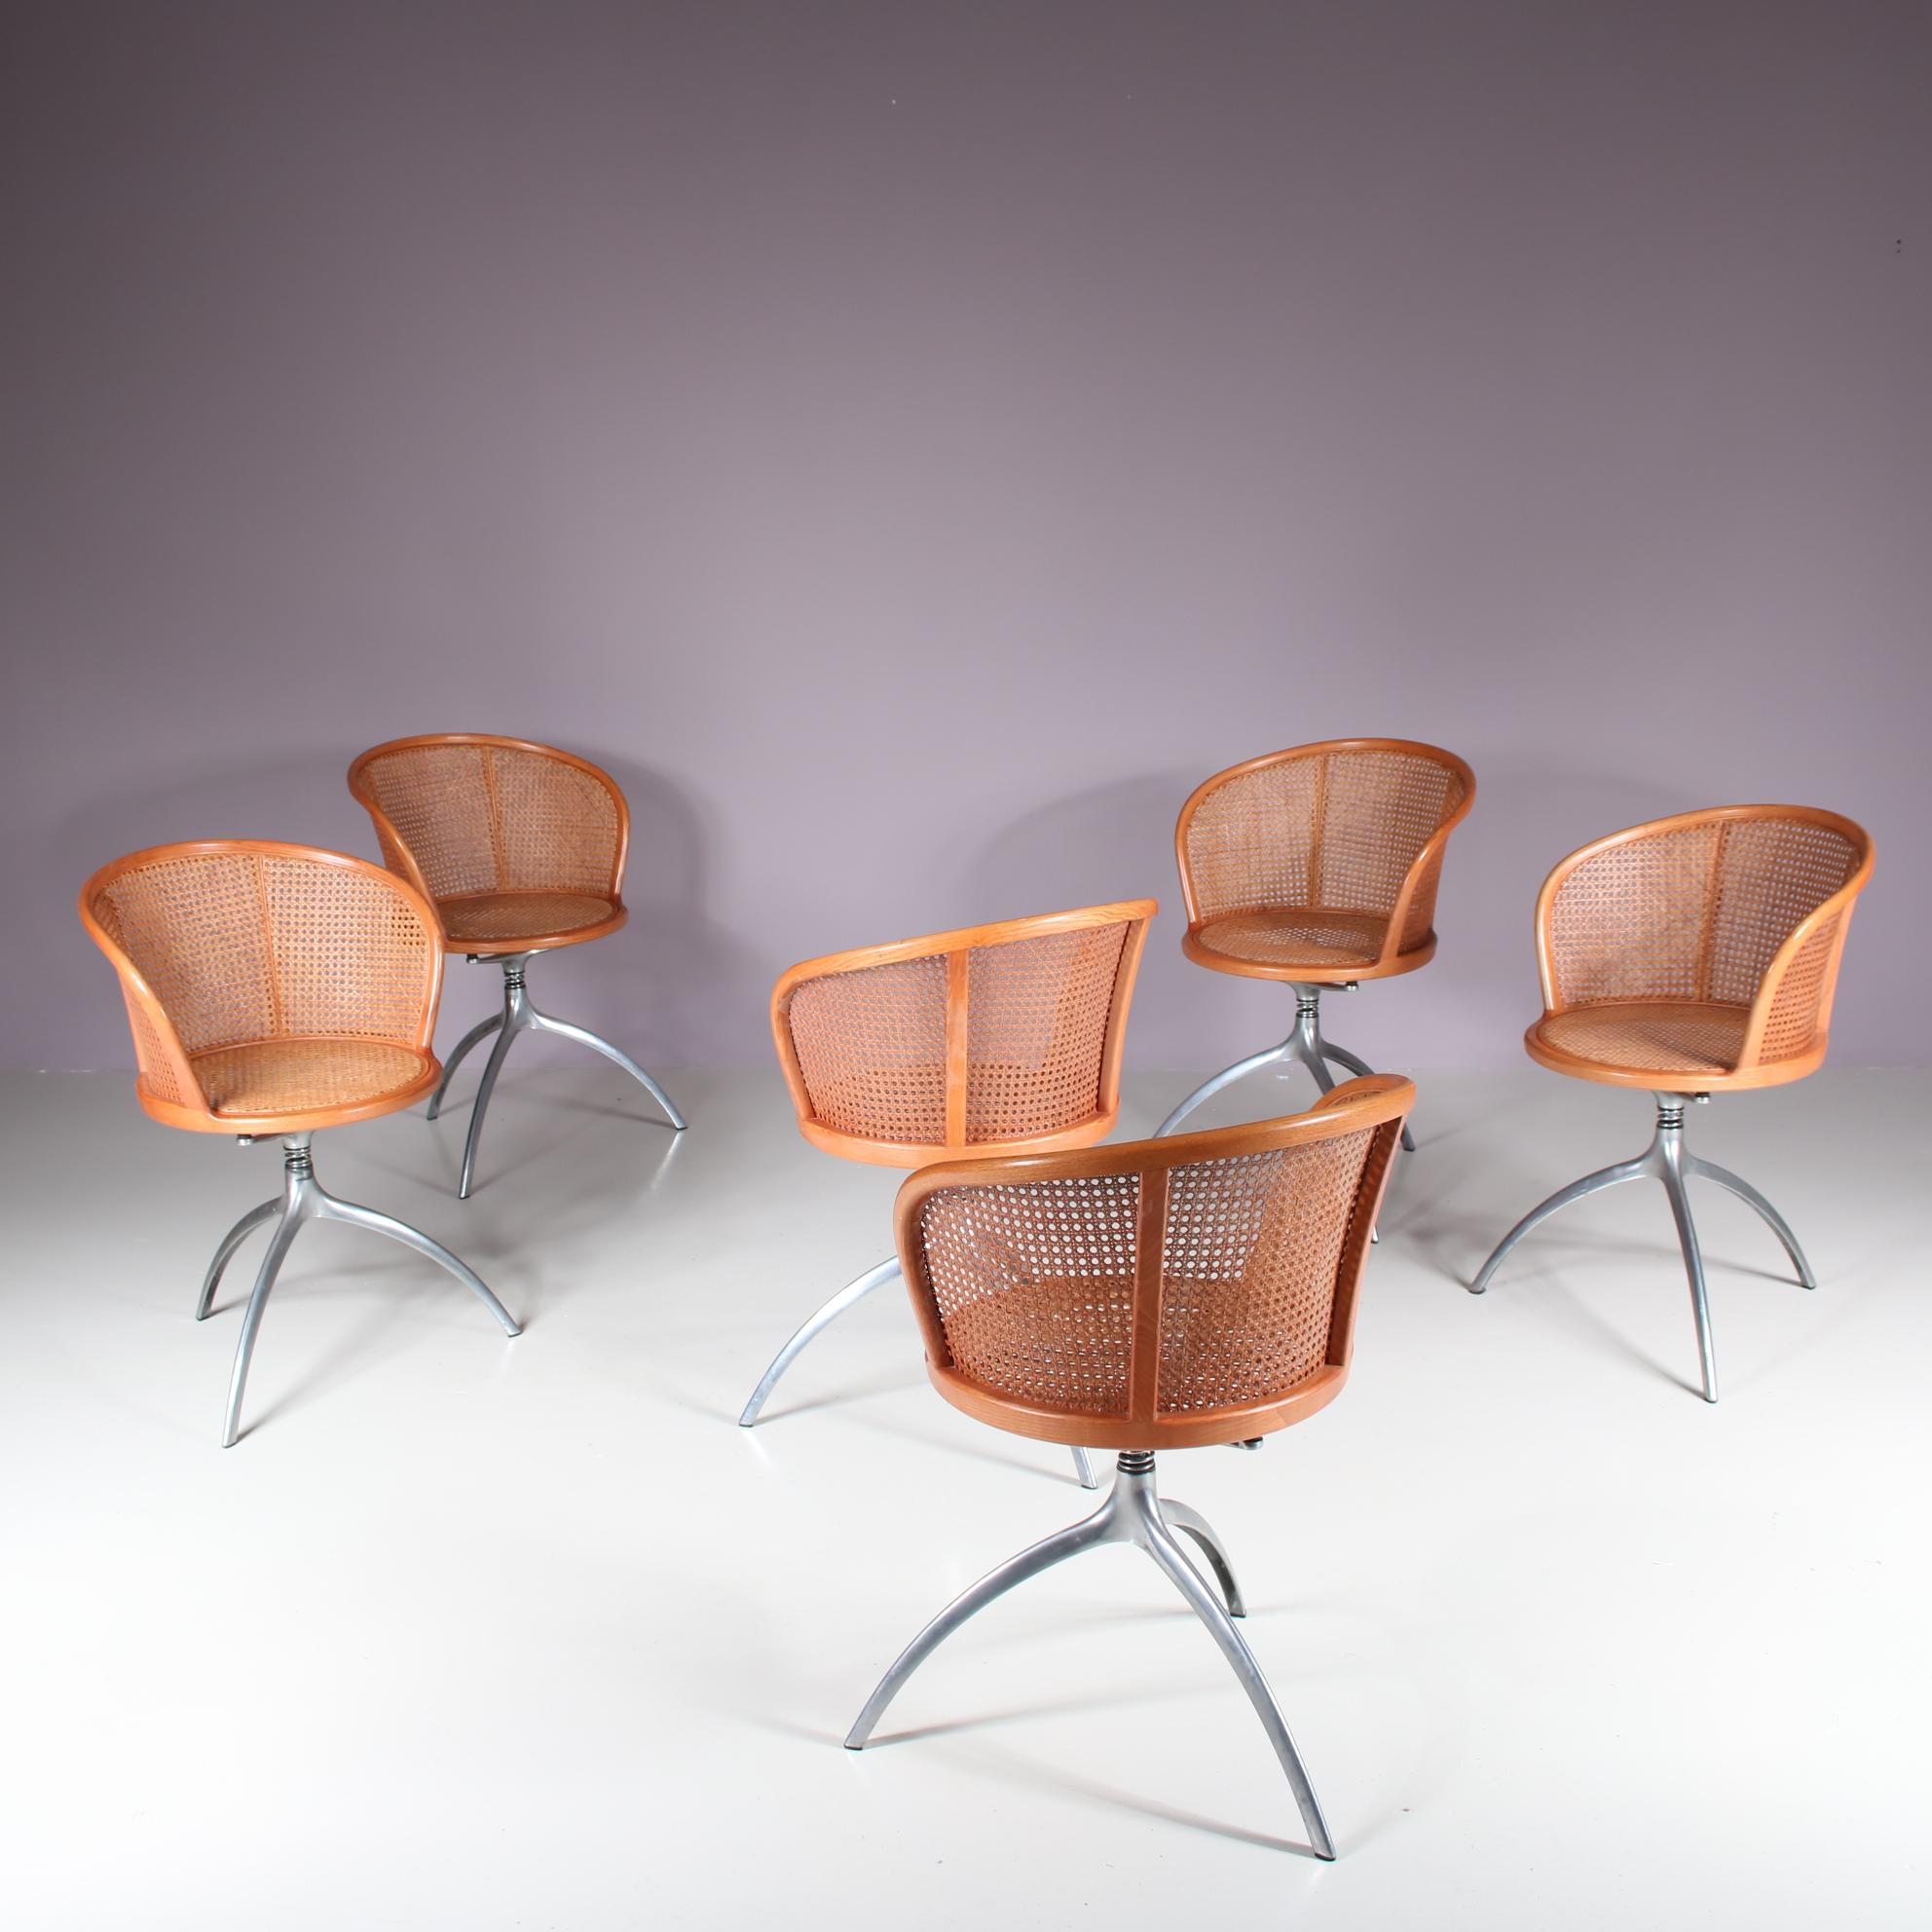 Late 20th Century Set of 6 “Young Lady” Chairs by Paolo Rizzatto for Alias, Italy 1990